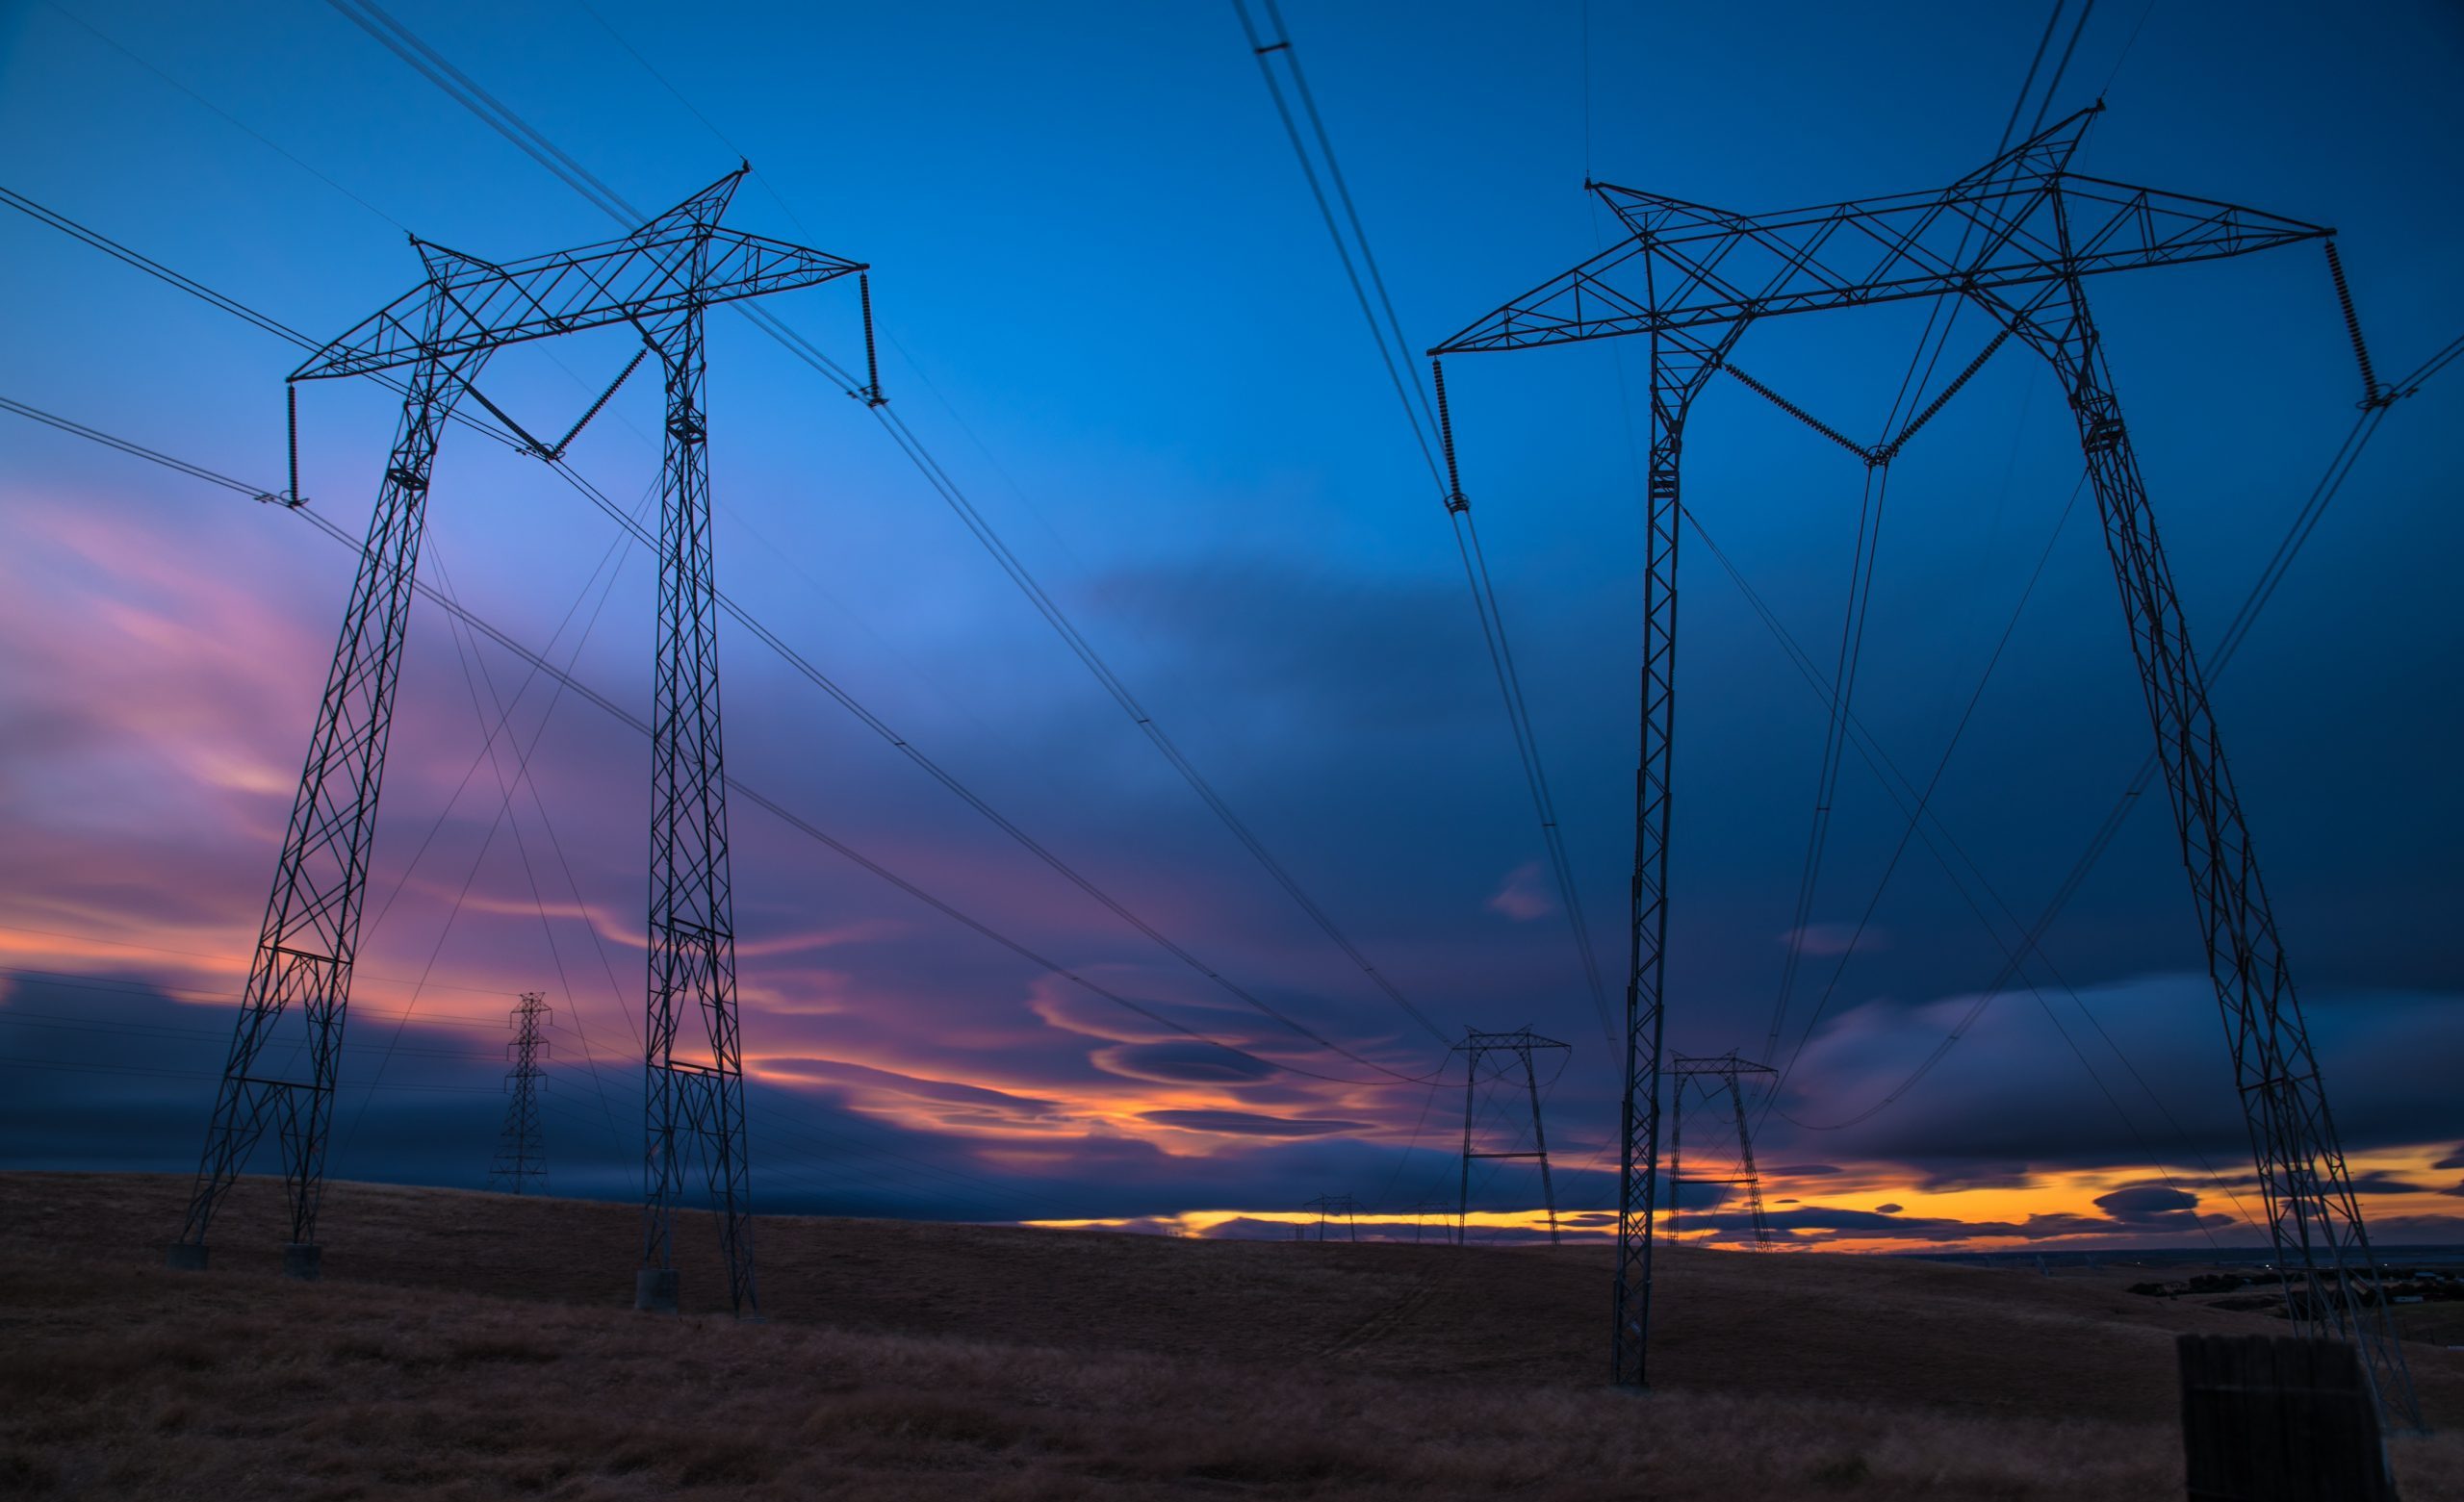 Image of Transmission power lines